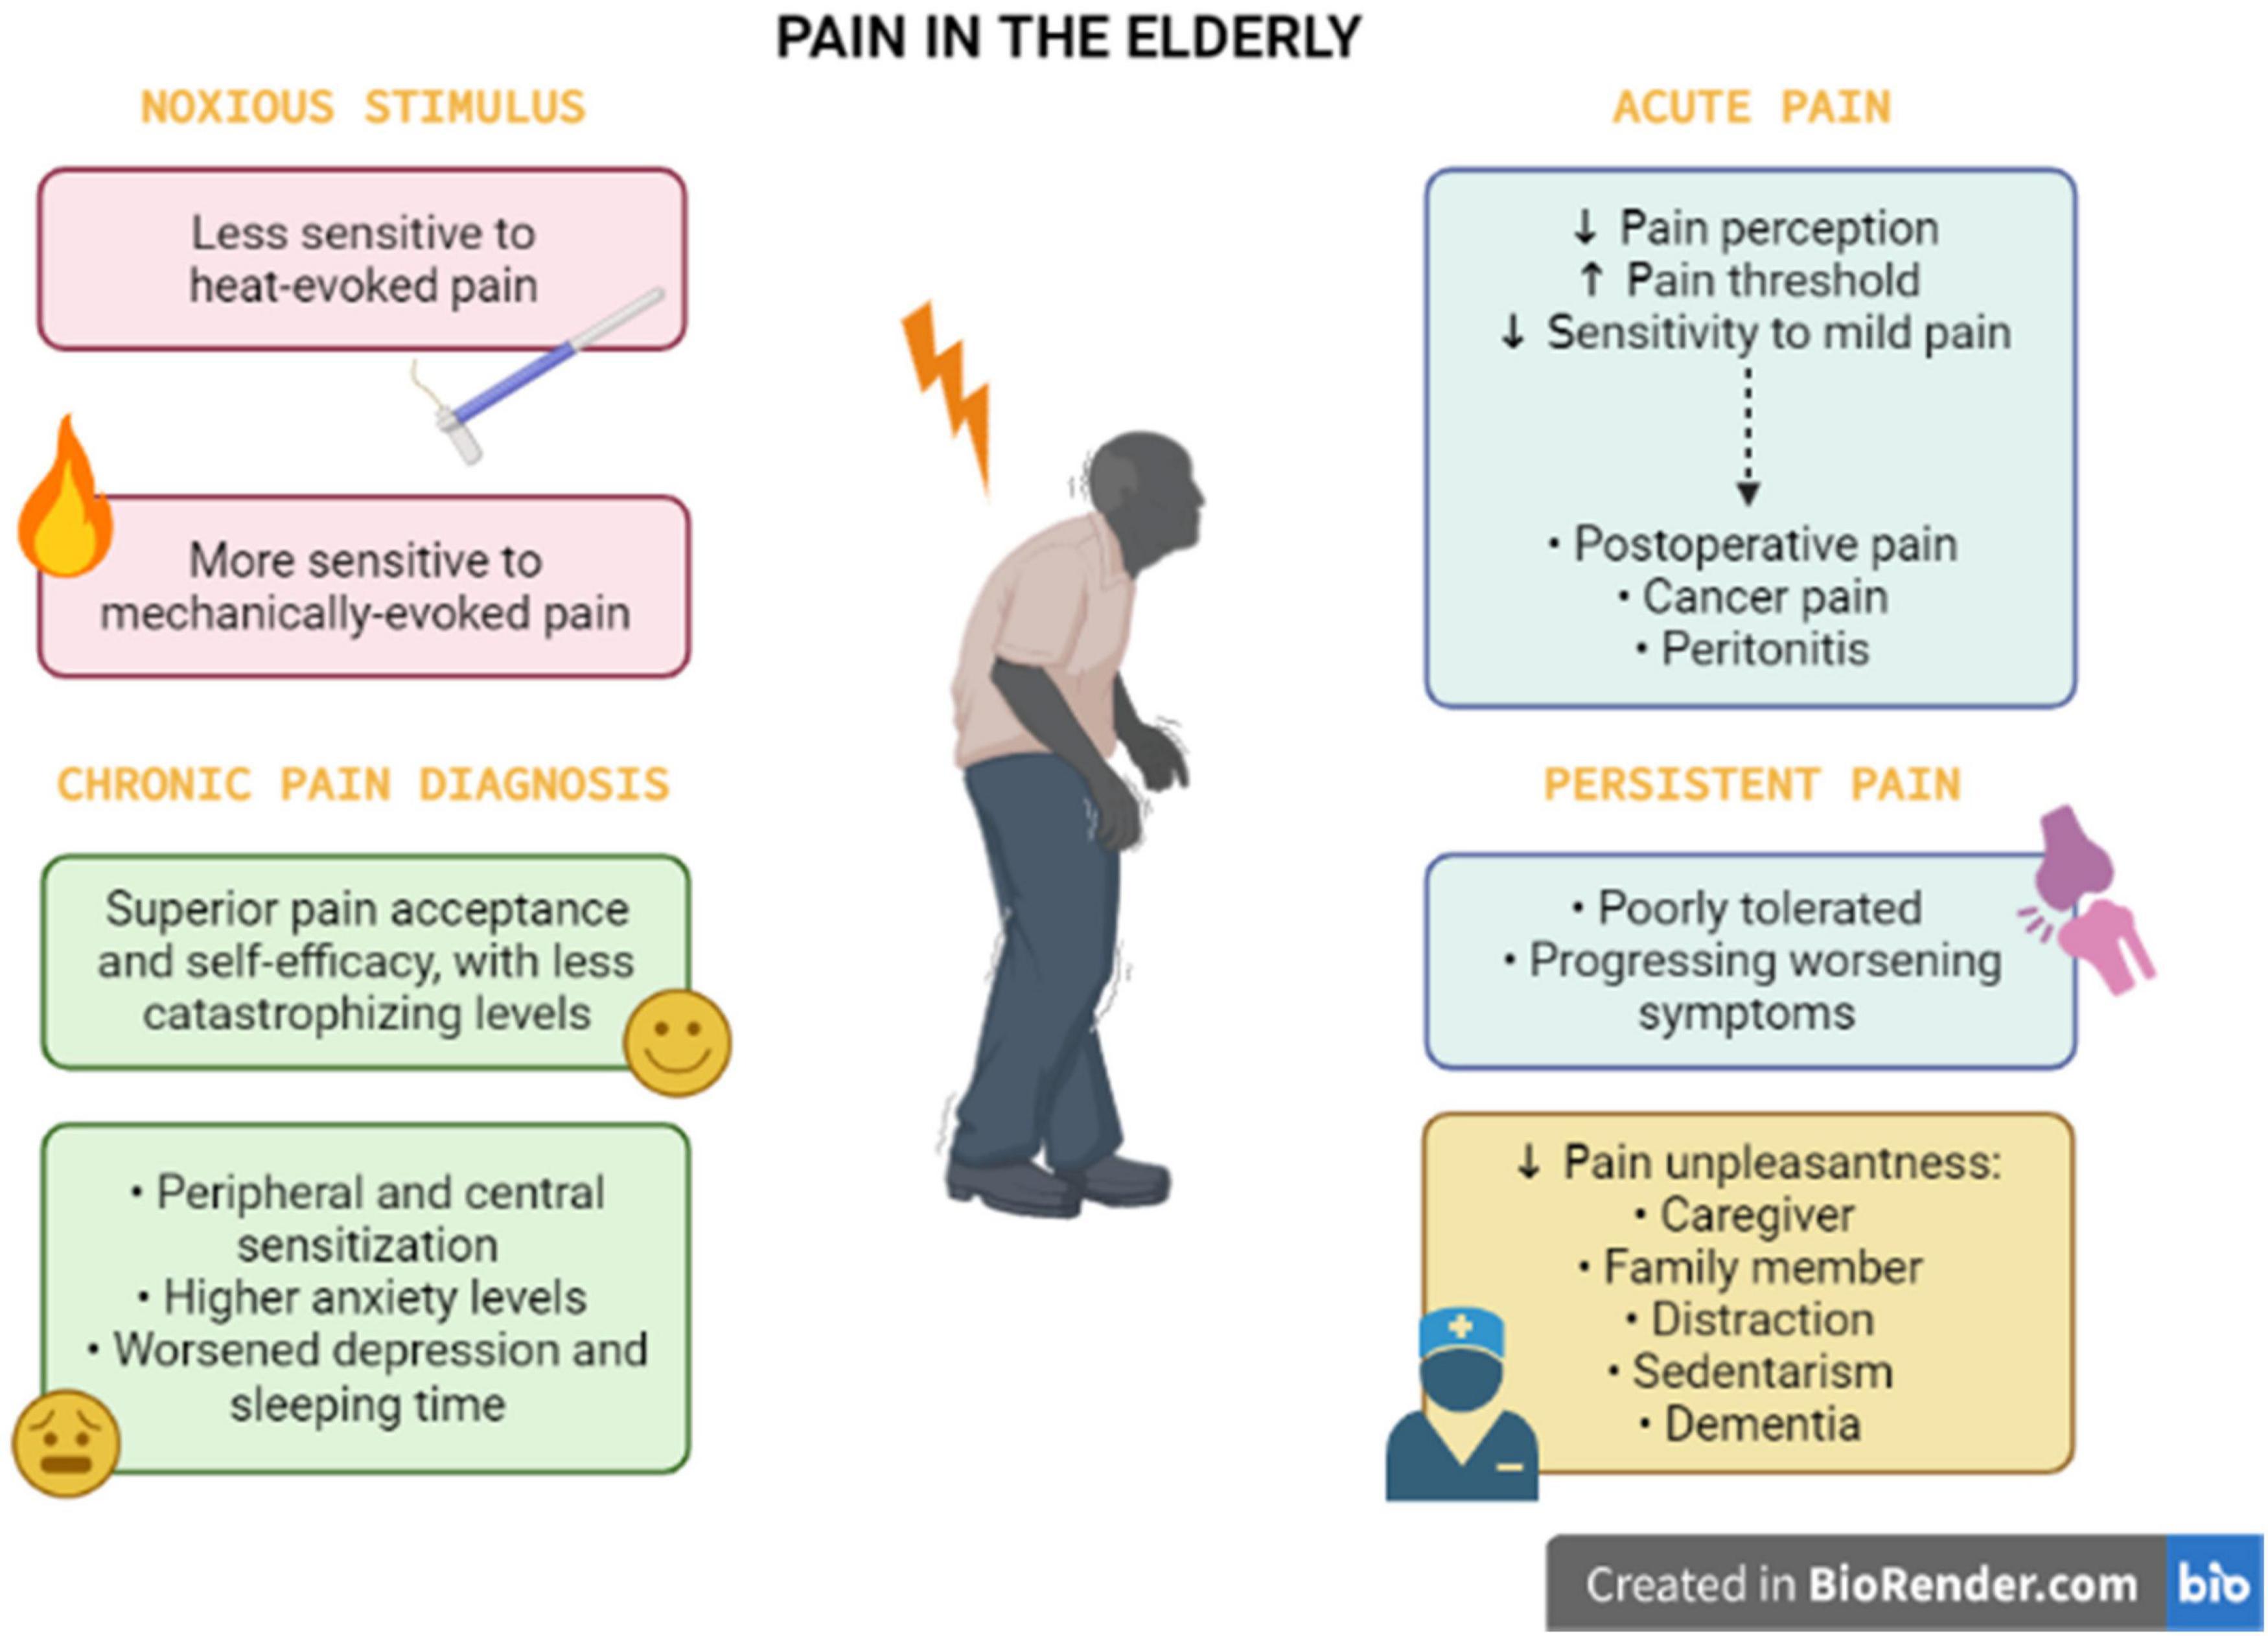 PDF) Assessment of quality of care in acute postoperative pain management